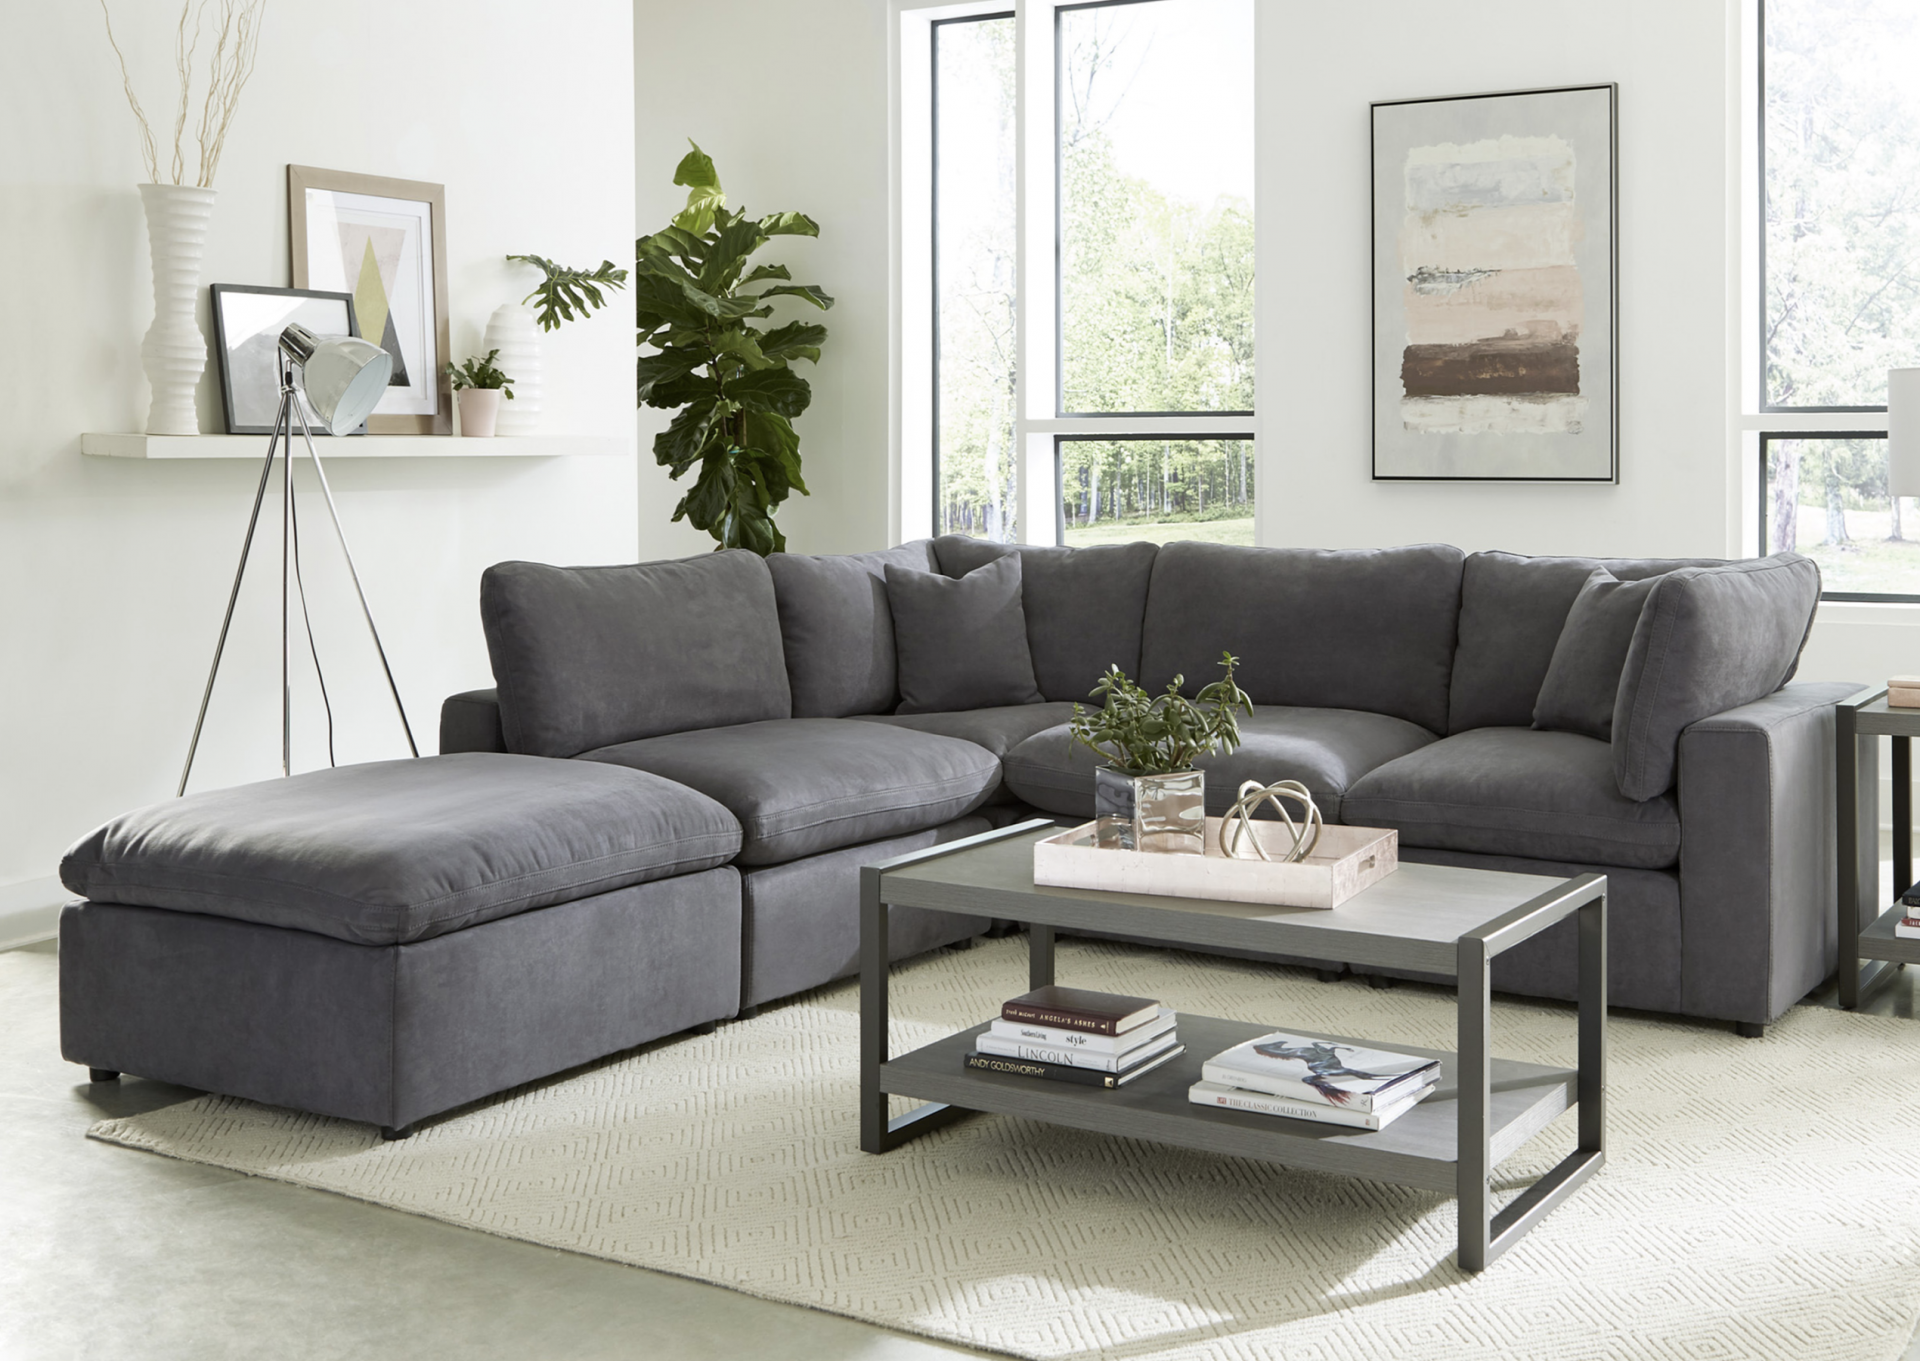 Guthrie 5 pc. Sectional,MISC.